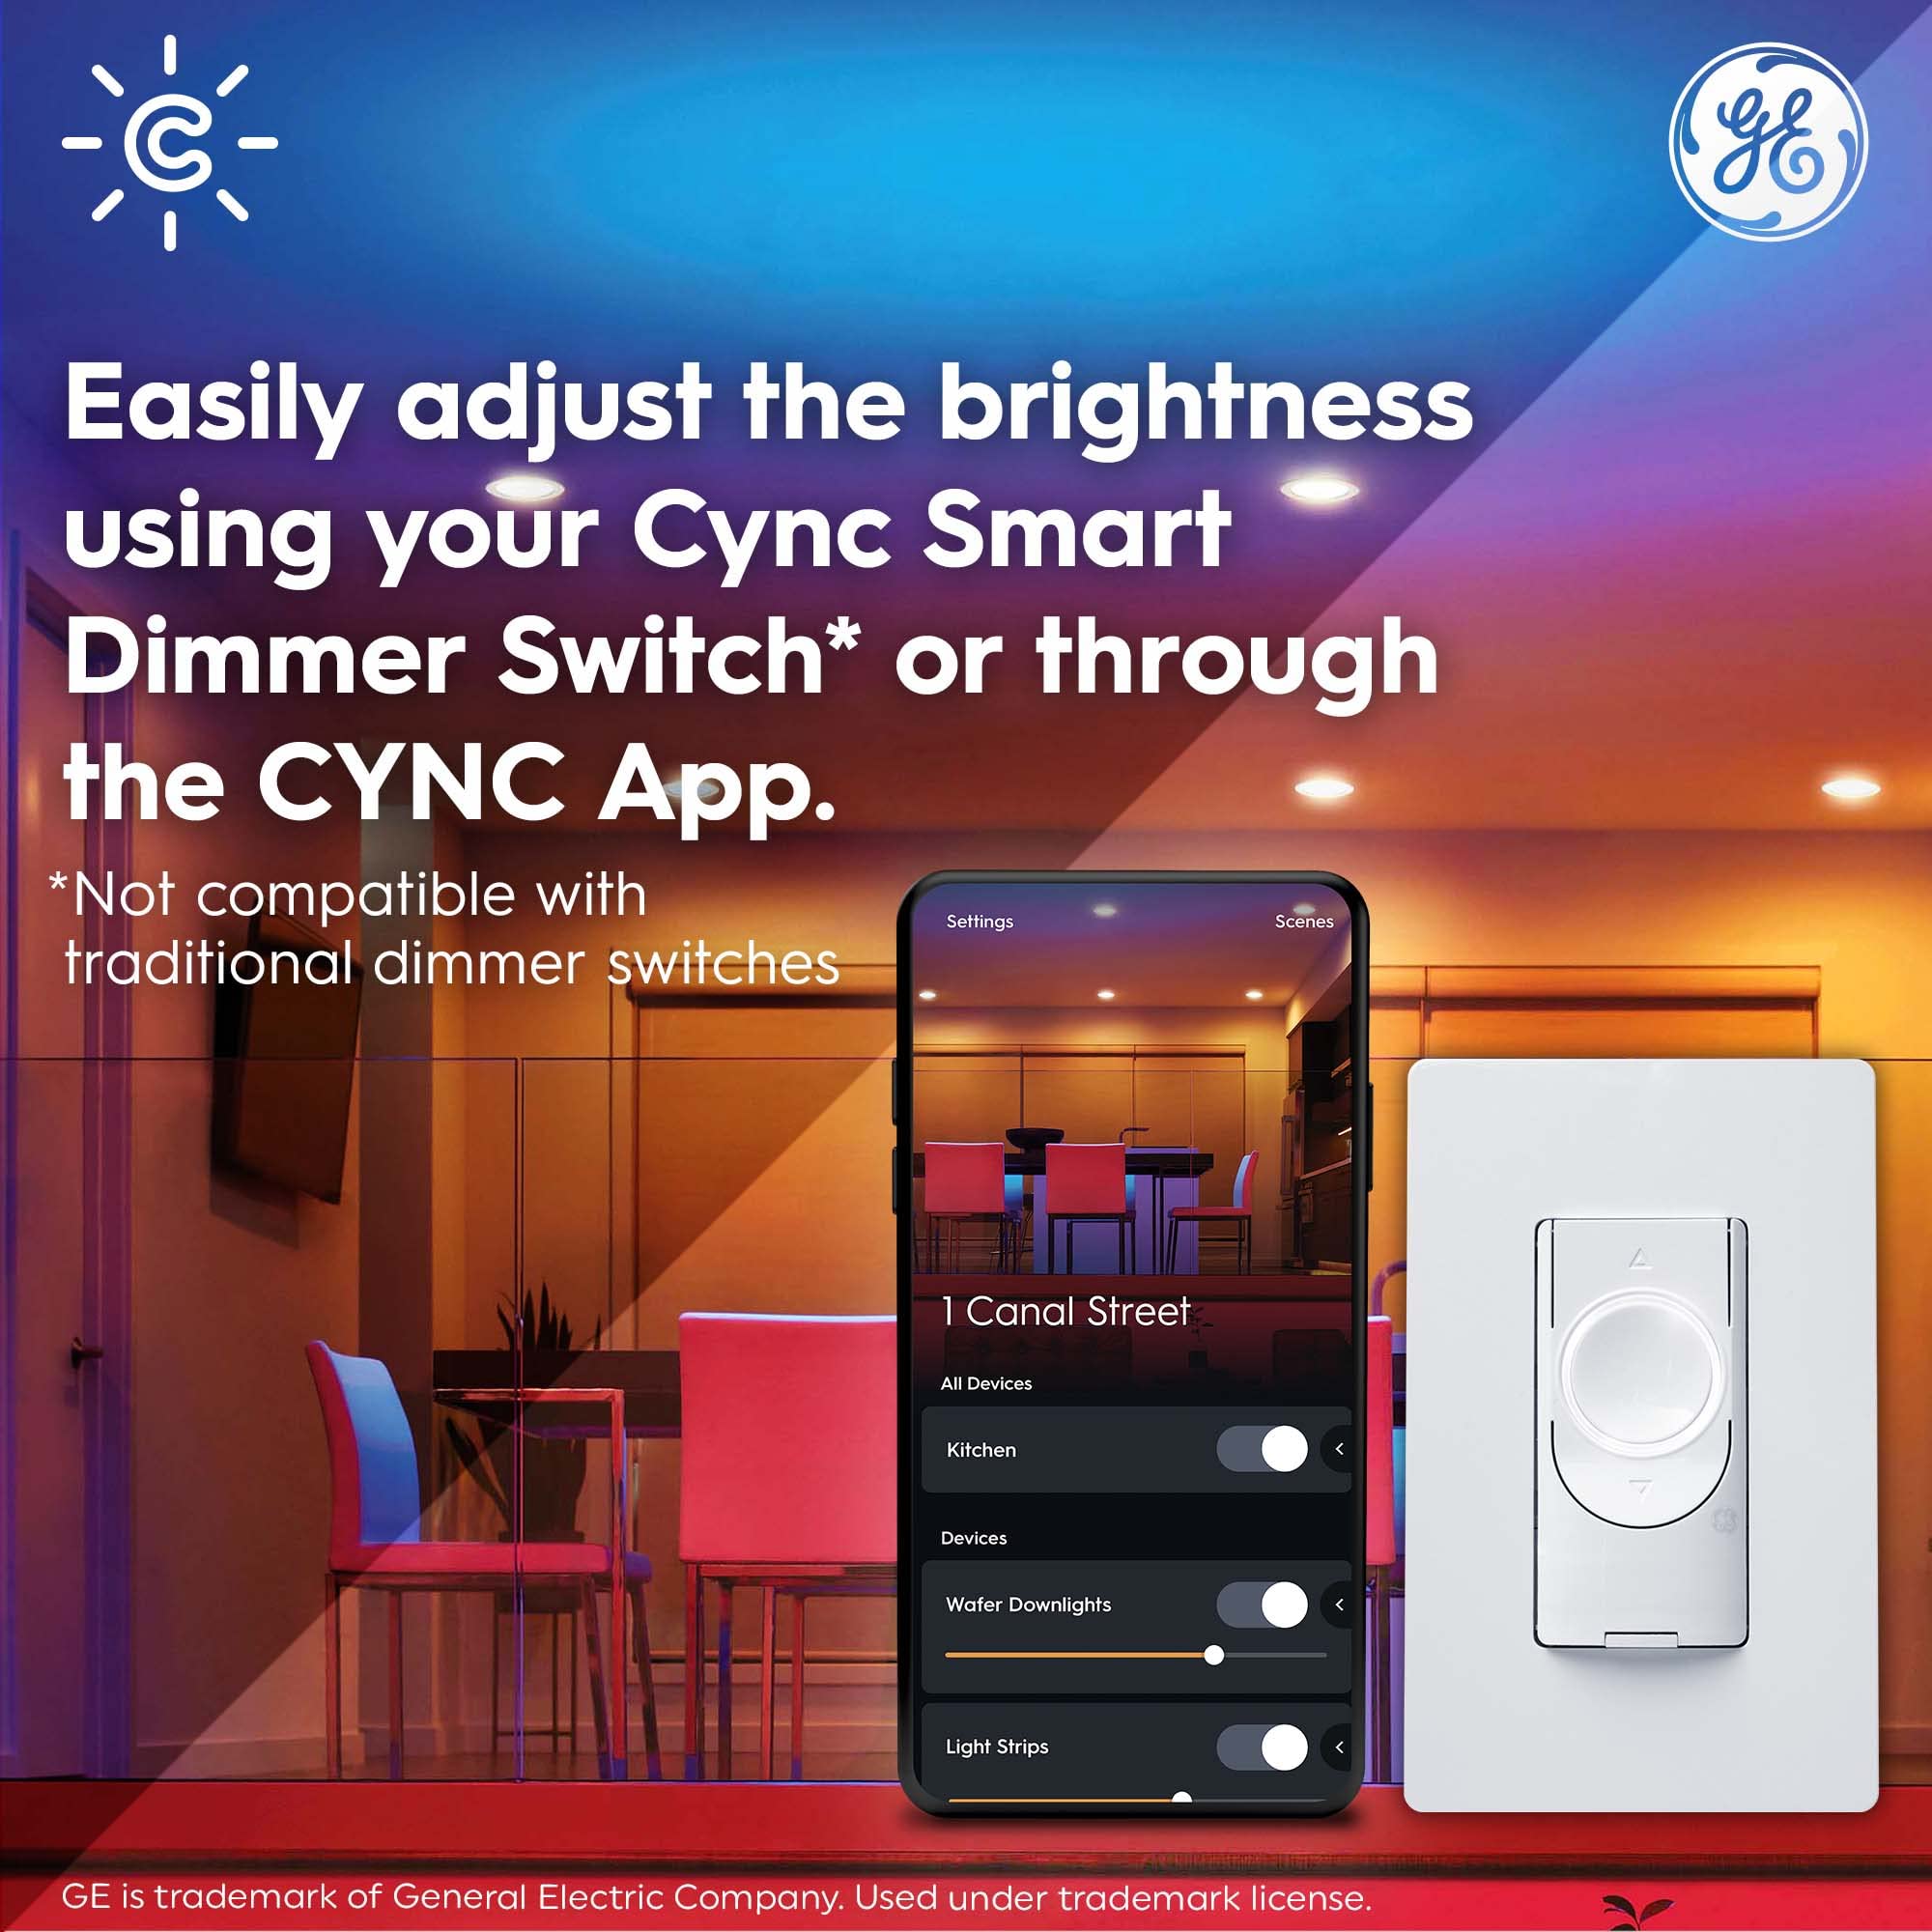 GE CYNC Smart LED Wafer Downlight Fixture, Reveal + Full Color, 6 Inches, Bluetooth and Wi-Fi, Works with Alexa and Google Home